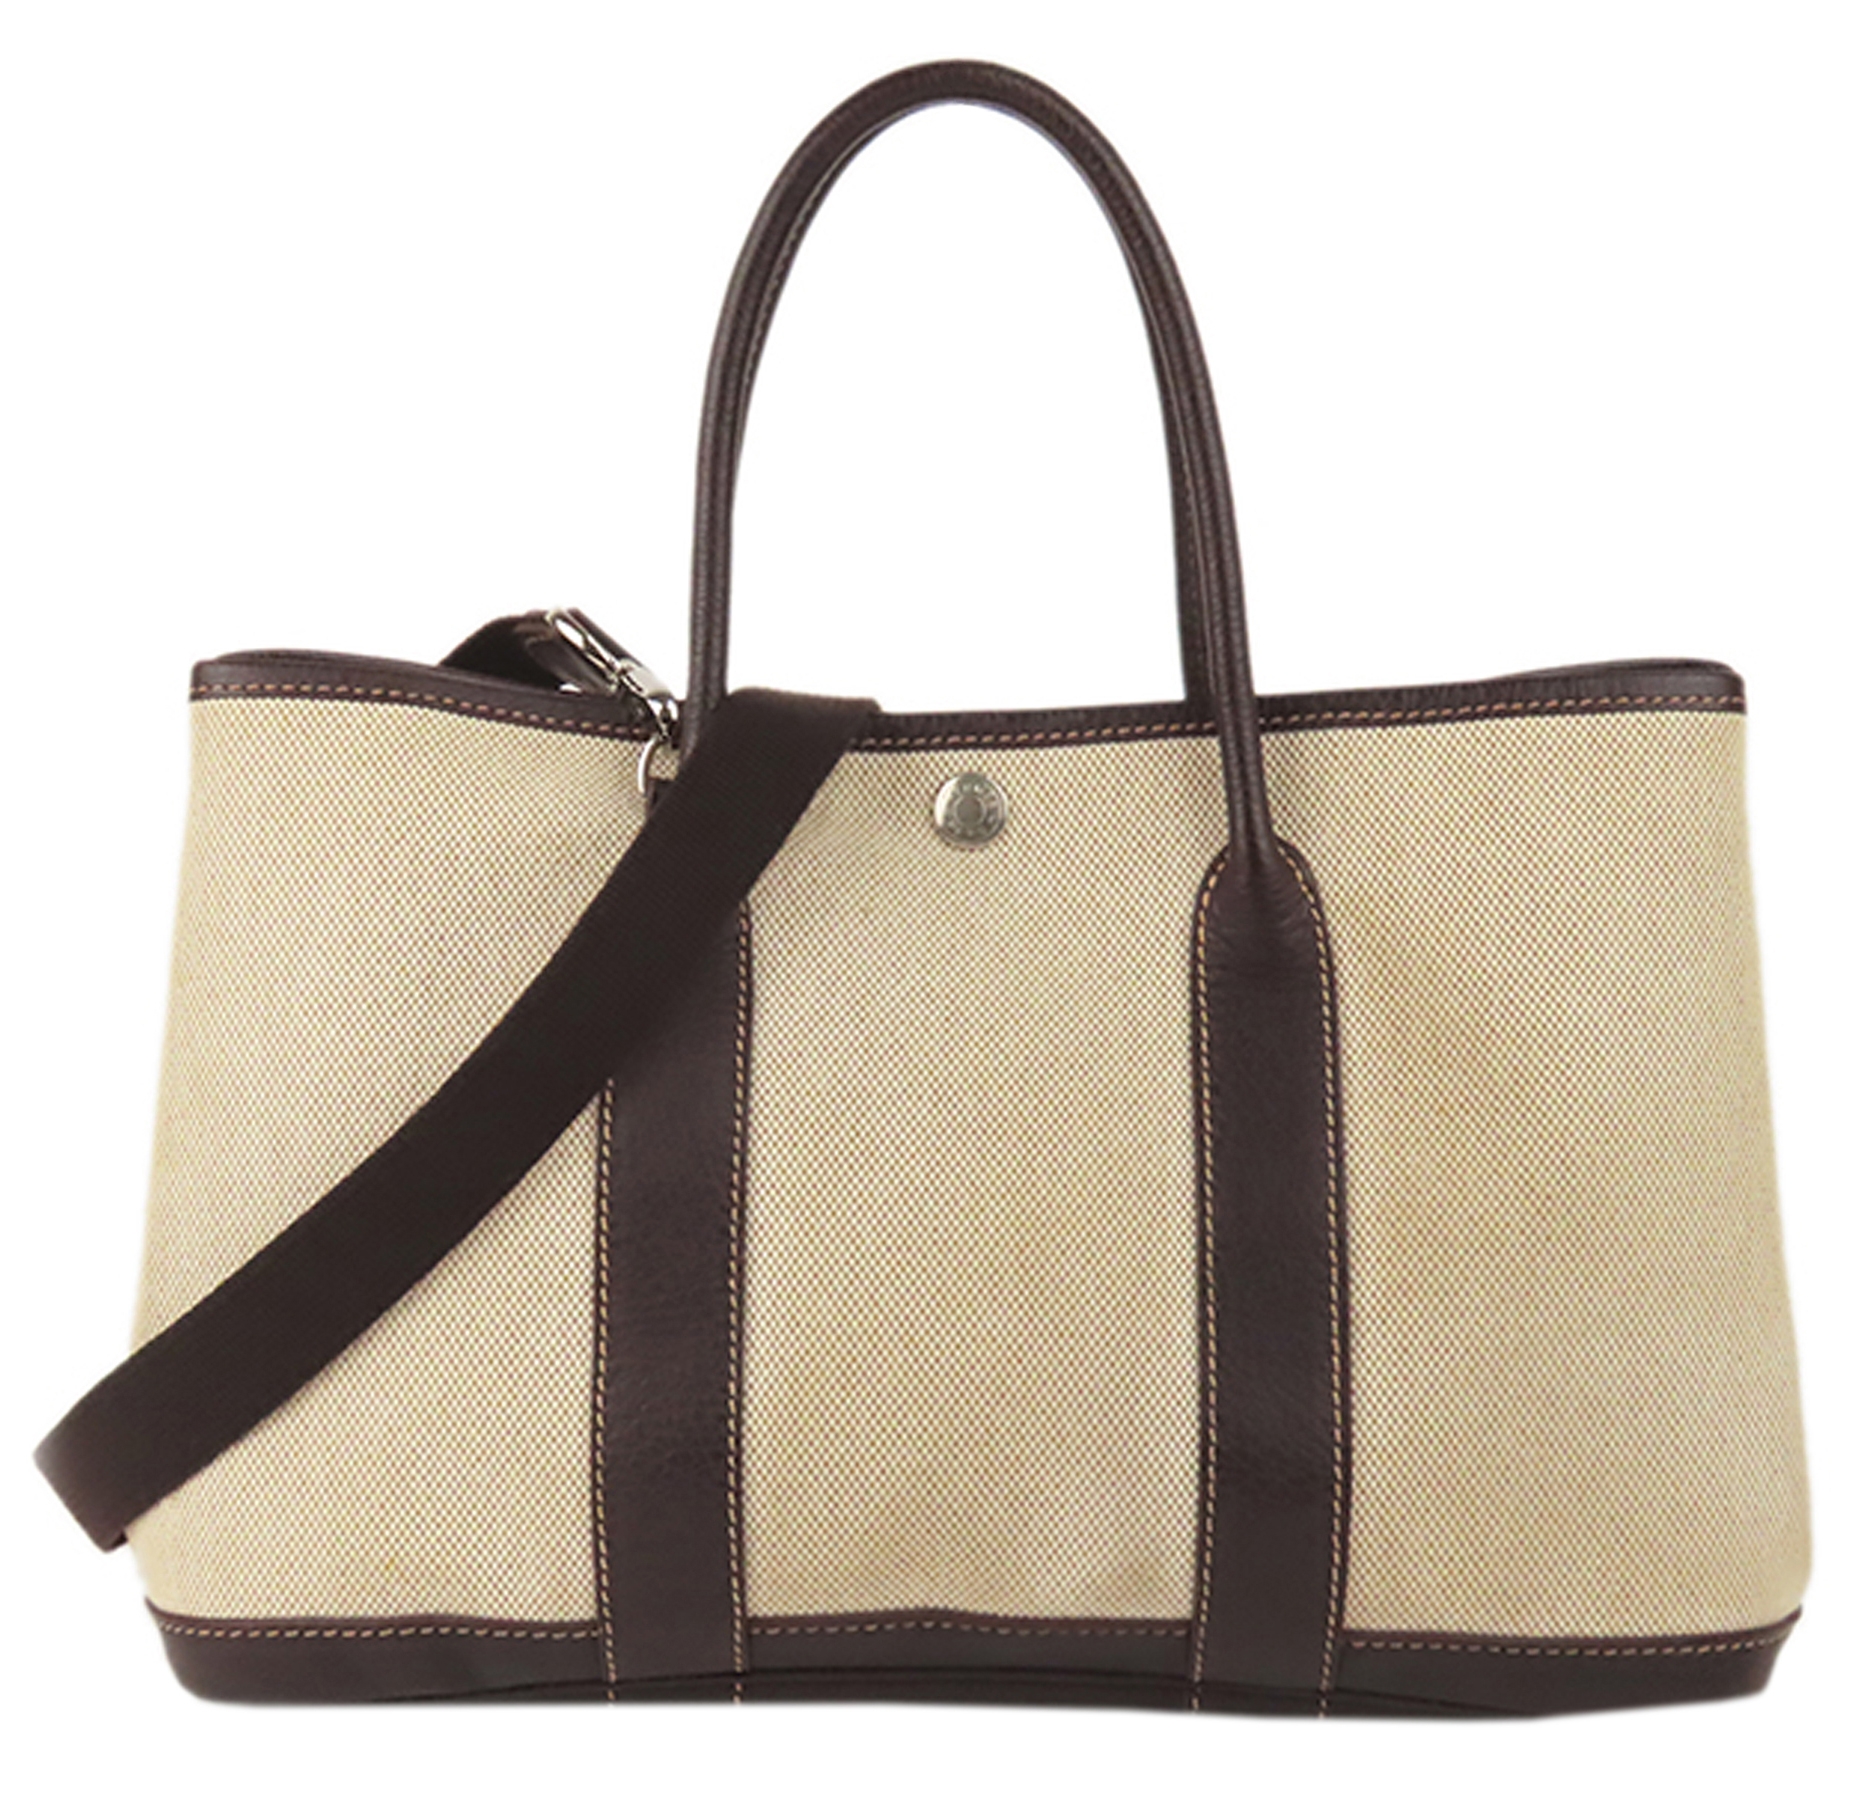 Hermes Garden Party TPM Leather Tote Bag in Tan color